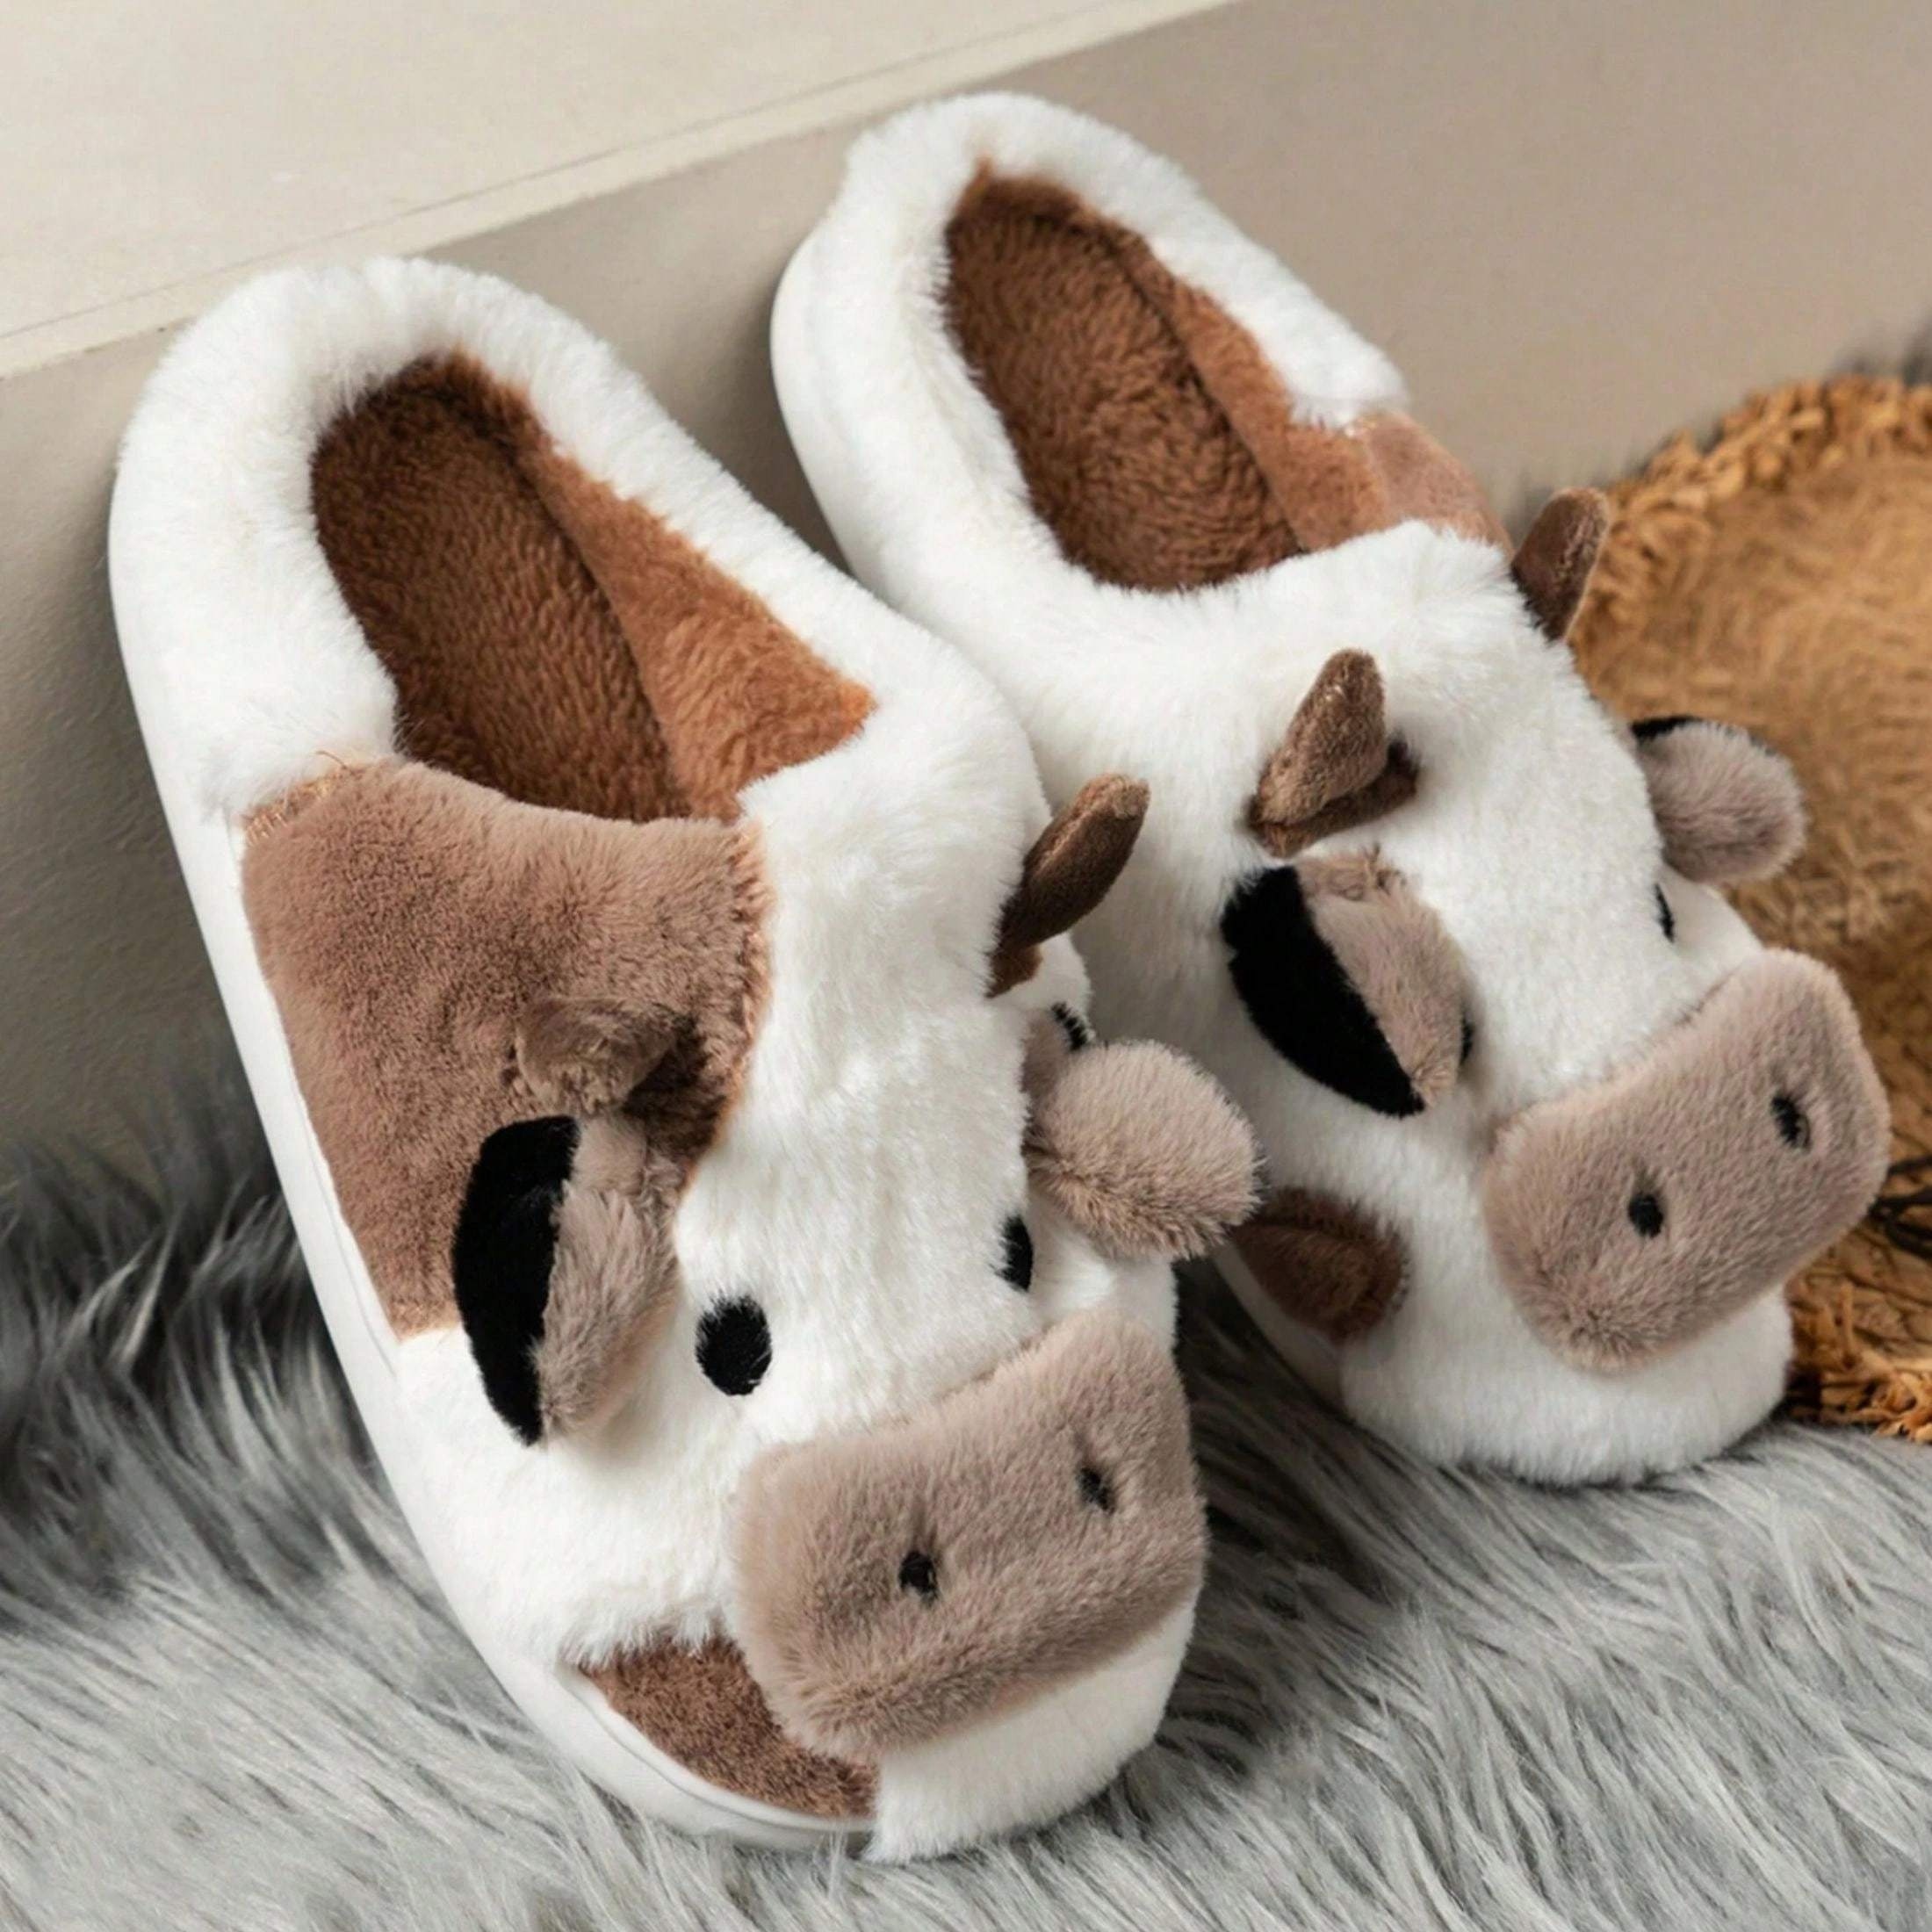 

Cow Slippers For Women, Winter Warm Cozy House Slippers, Fuzzy Plush Animal Slippers, Soft Thick Sole Shoes, Furry Home Slippers For Indoor Outdoor